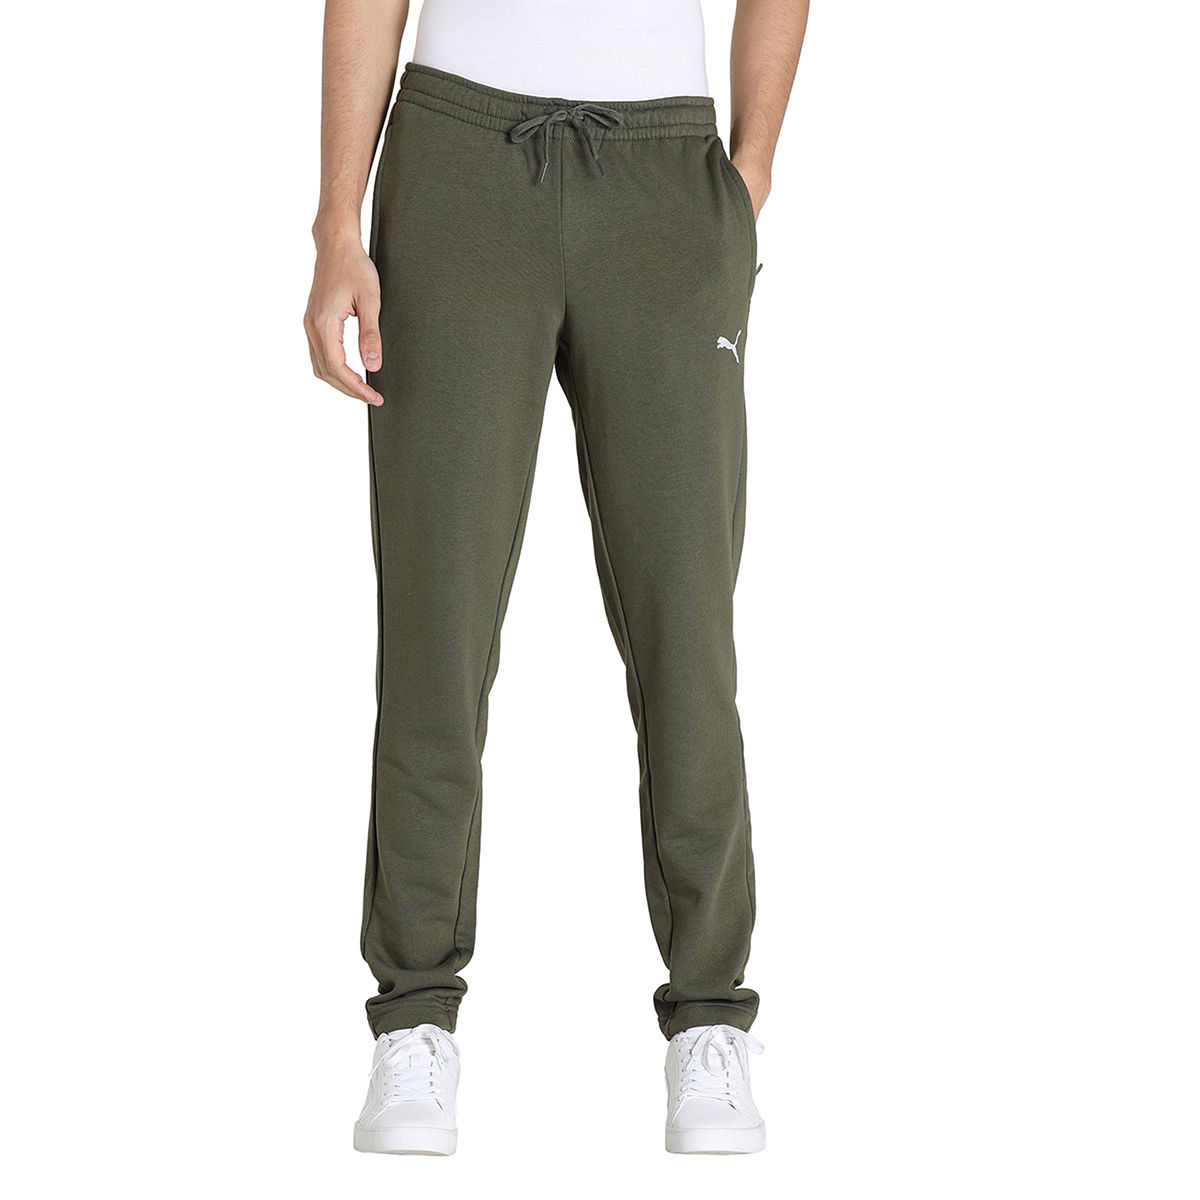 Puma ZIPPERED TERRY Mens Green Casual Track Pant (S)